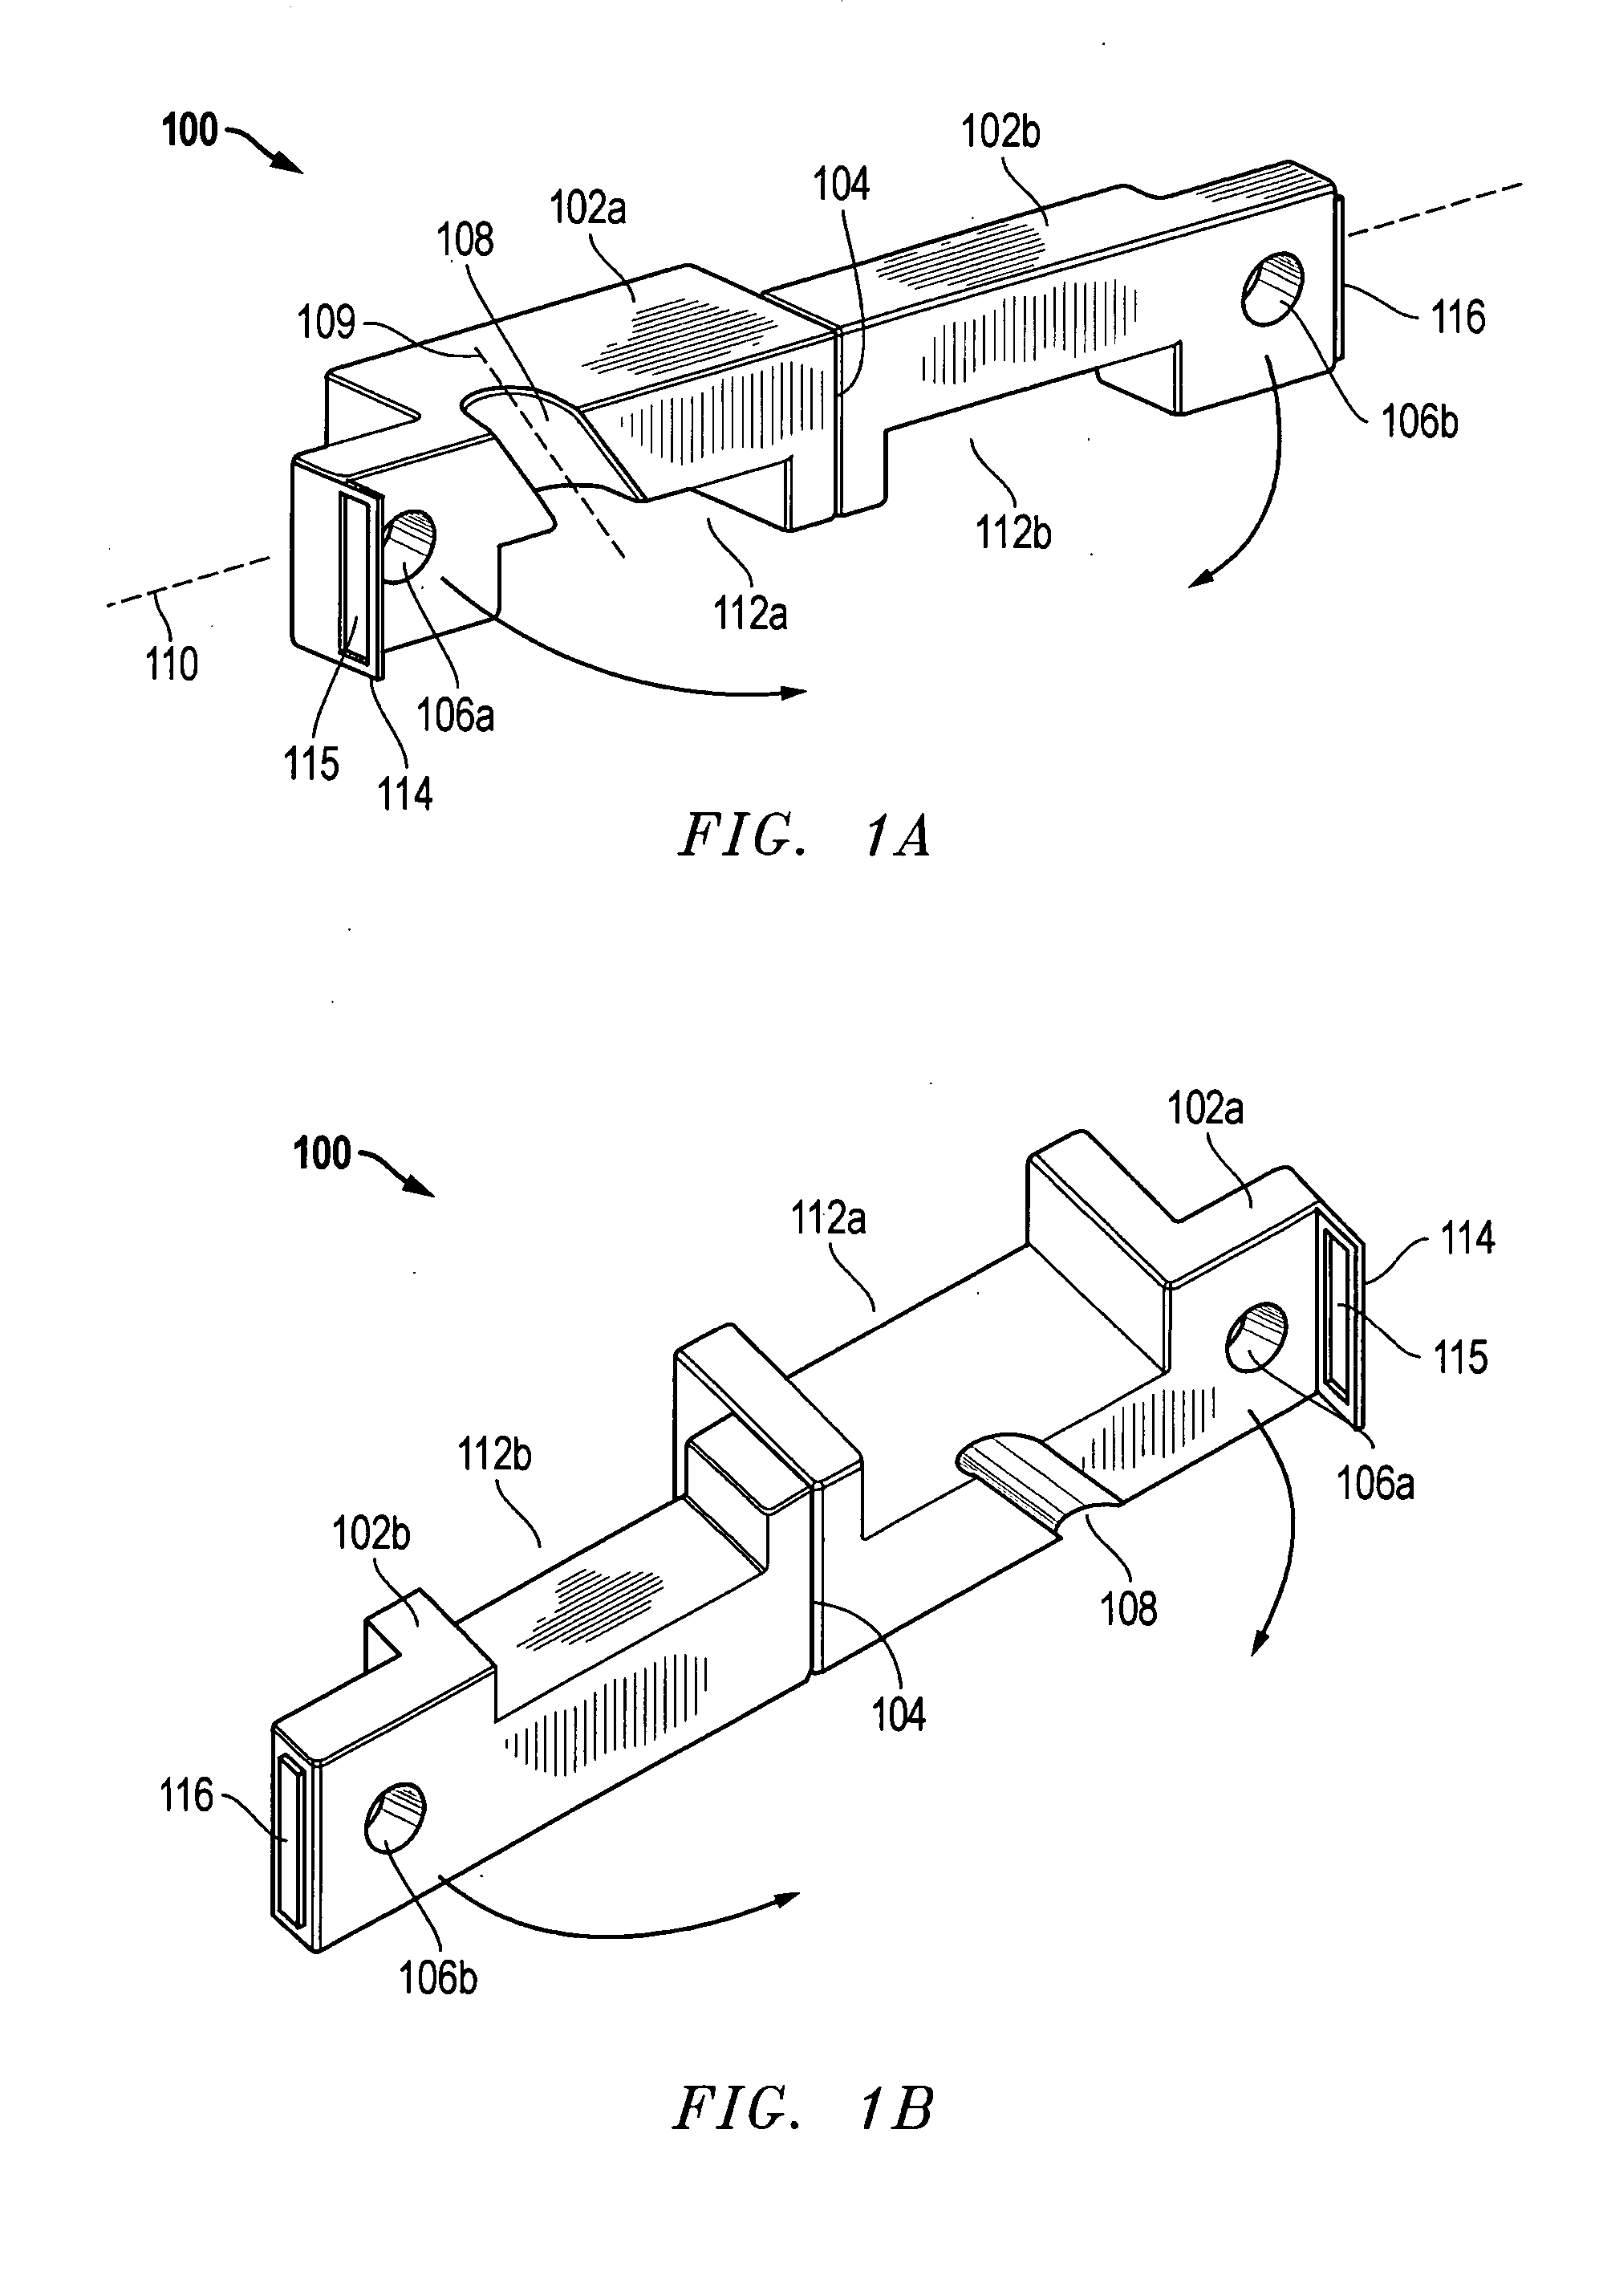 Apparatus and methods for securing switch devices